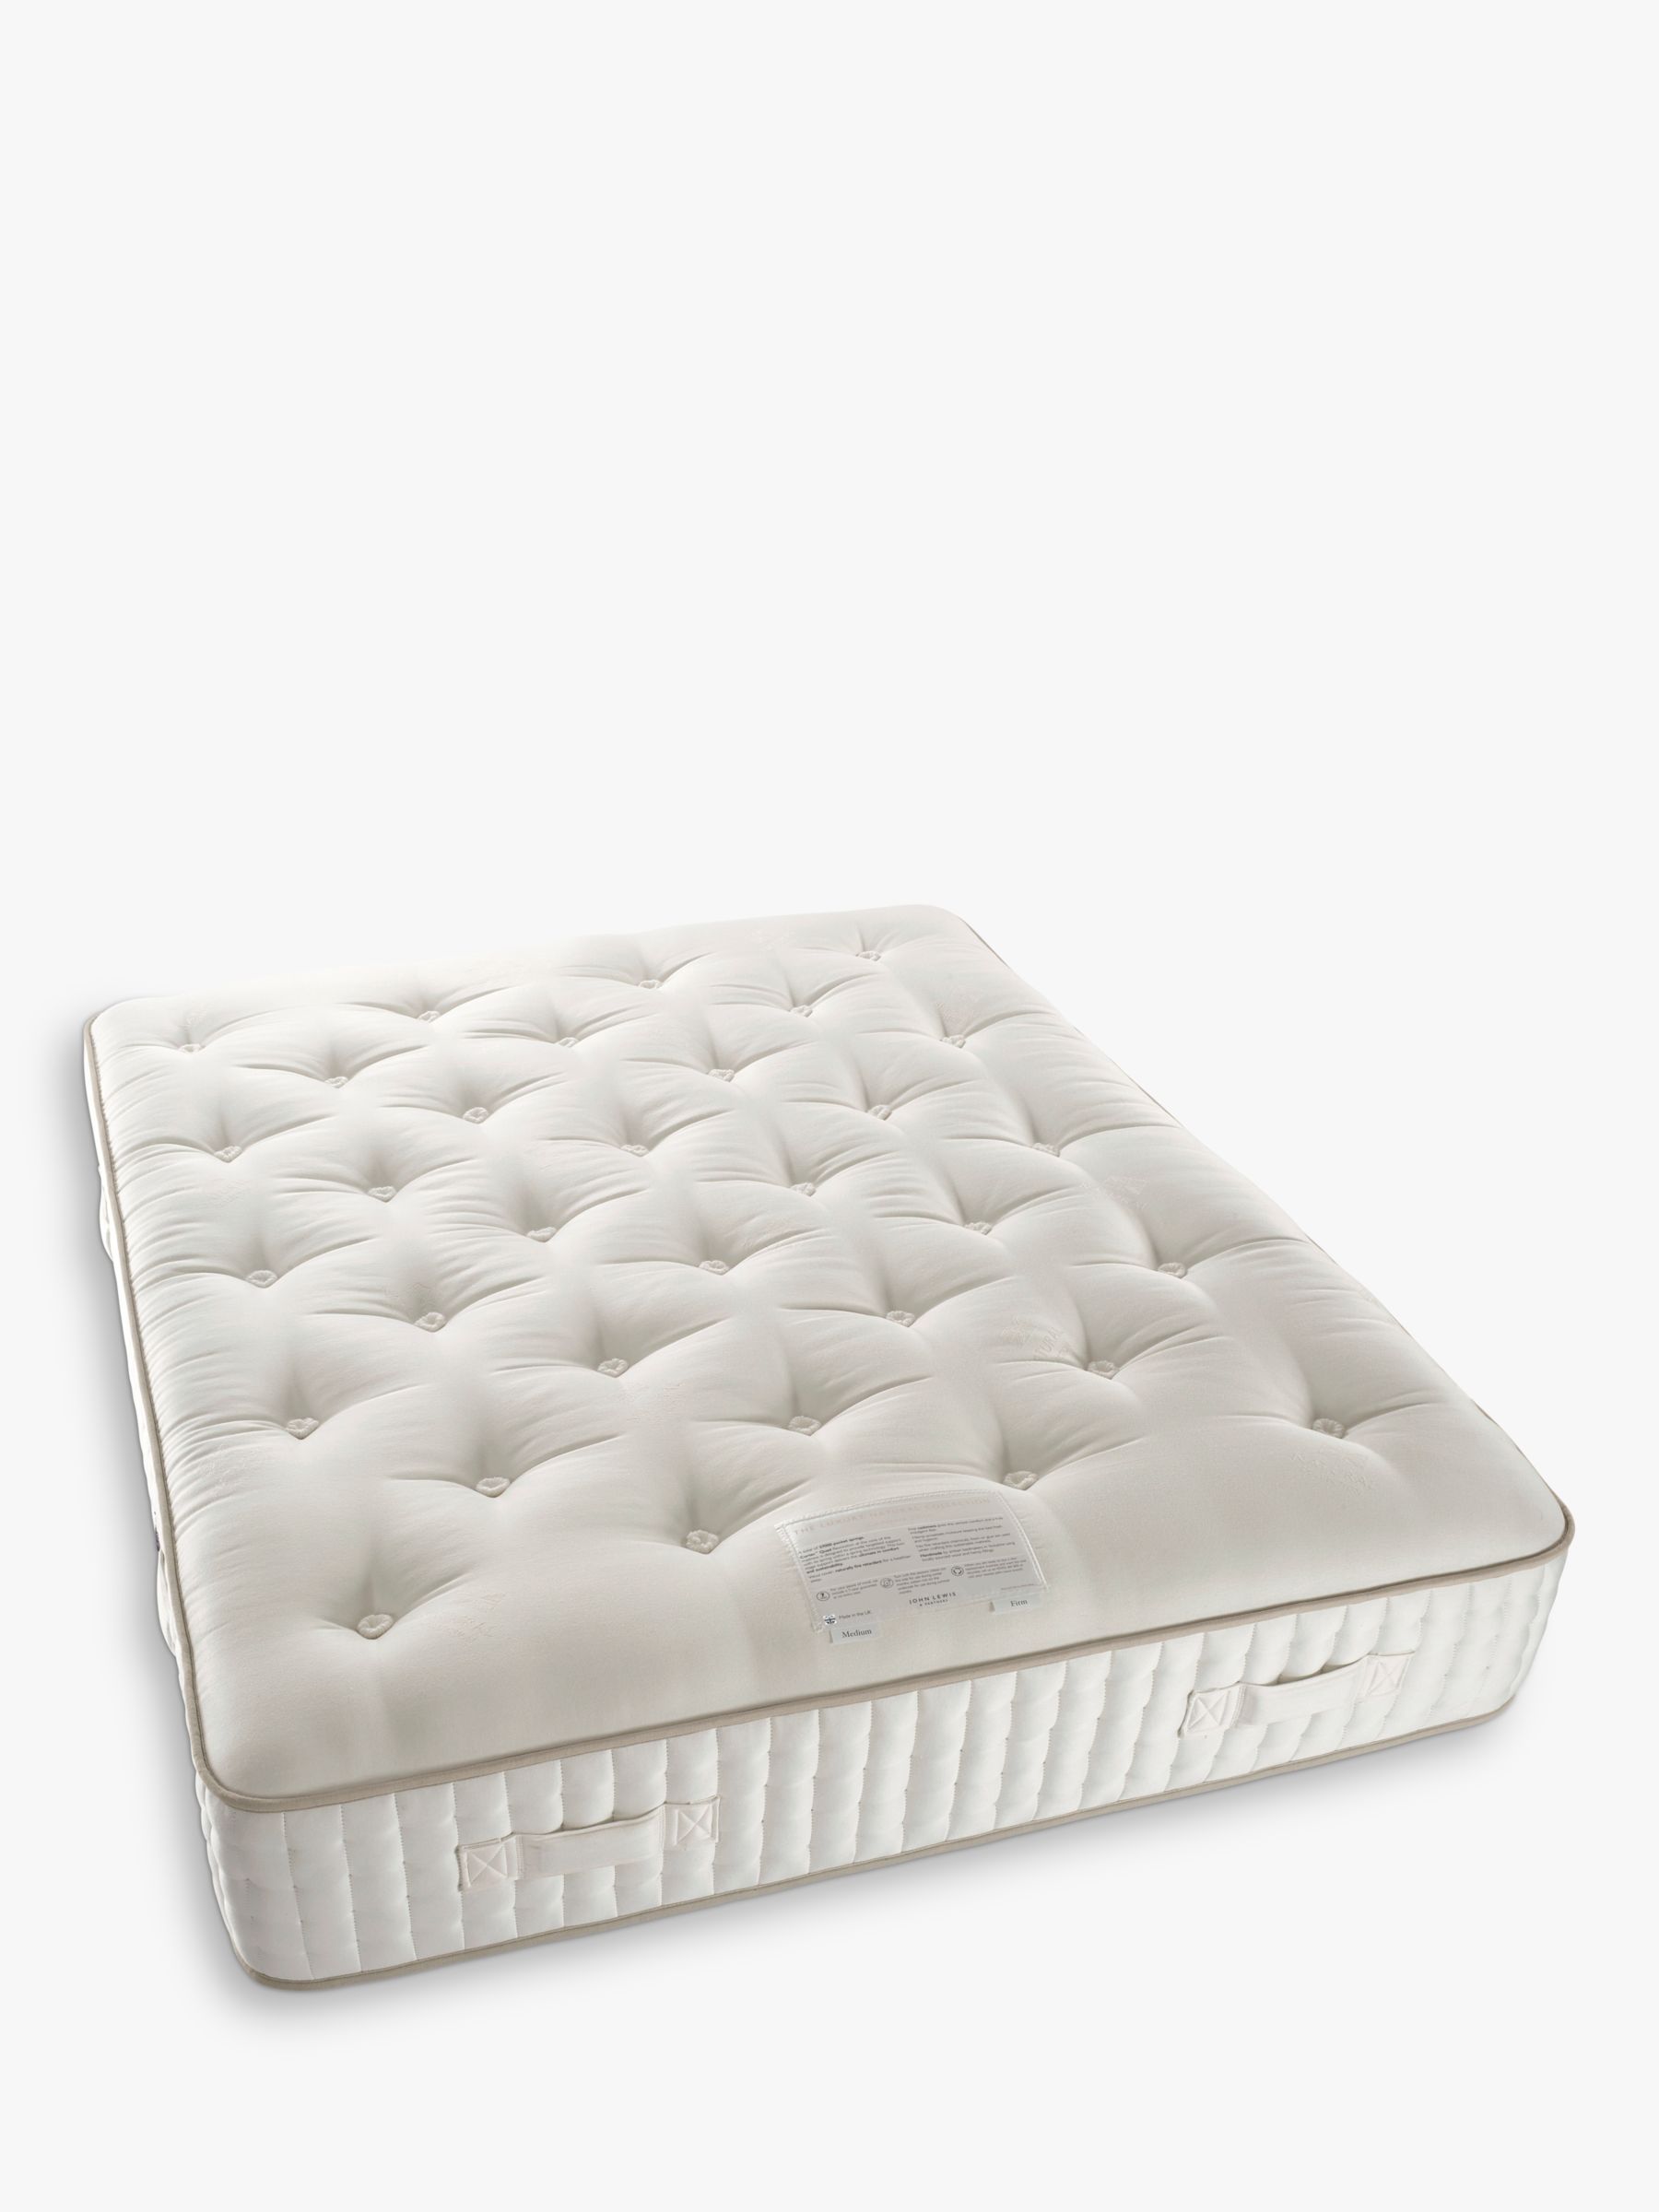 Photo of John lewis luxury natural collection cashmere 27000 super king size firmer tension pocket spring mattress